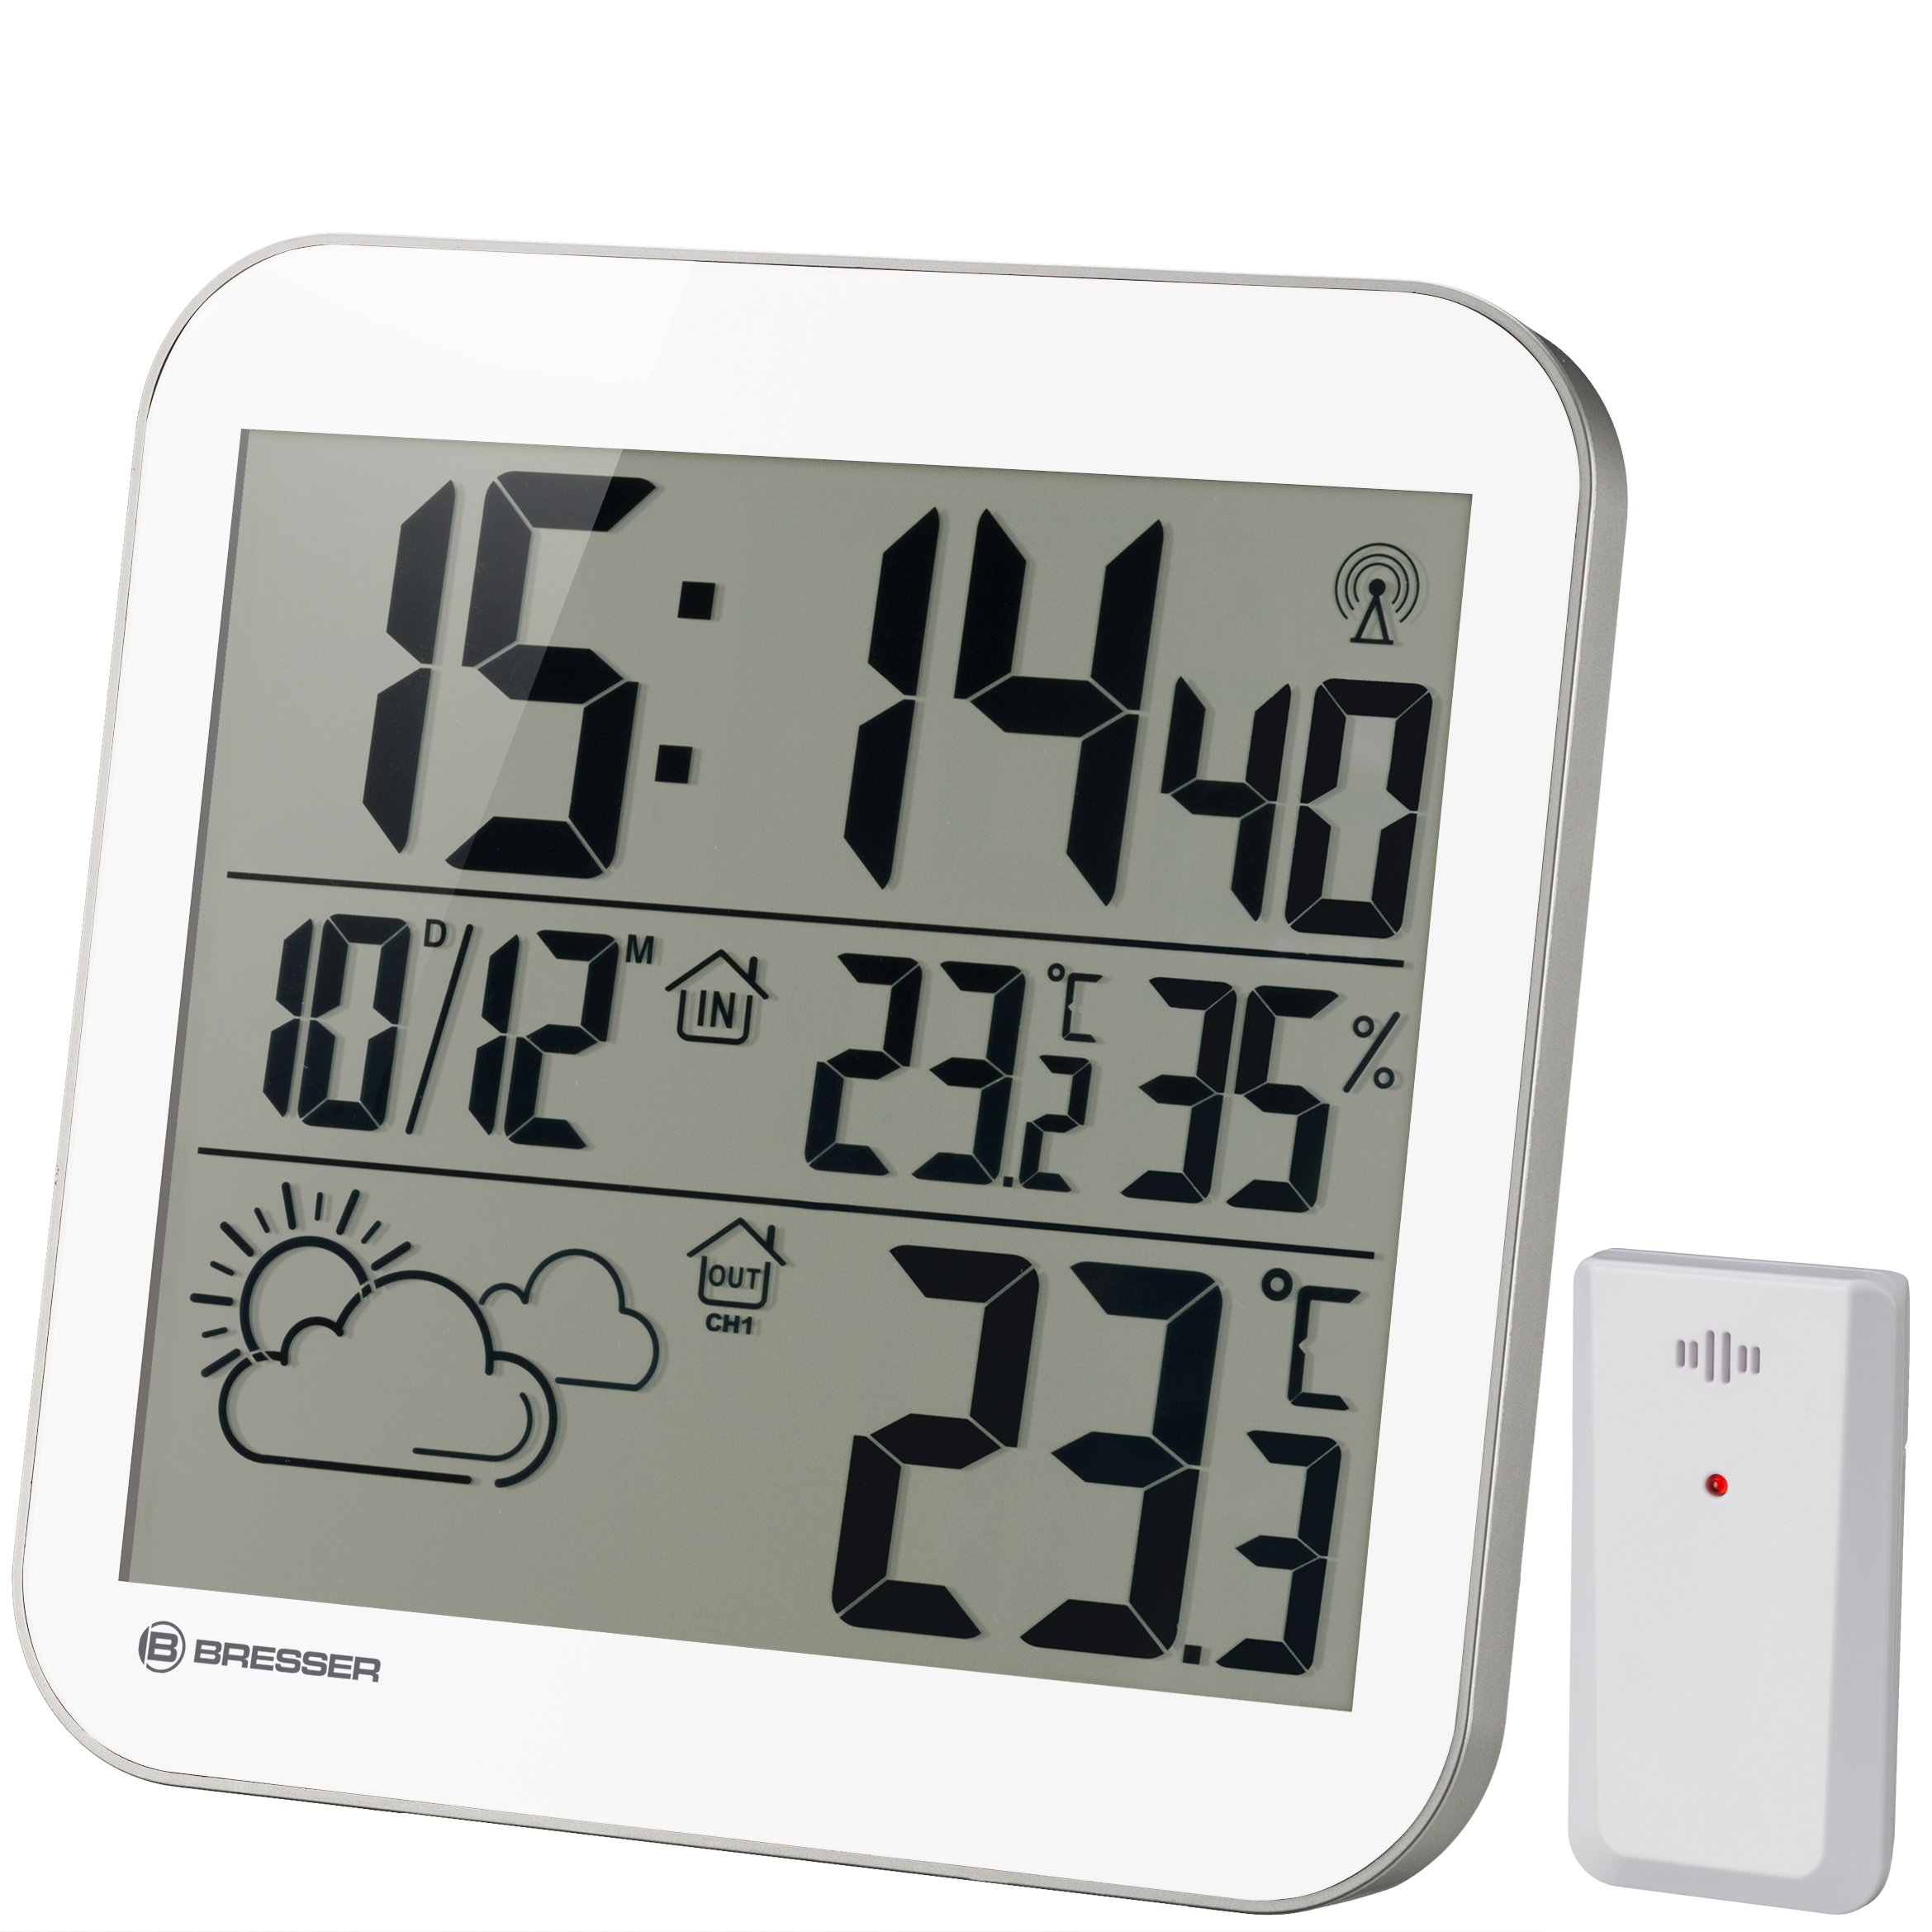 BRESSER MyTime LCD Weather wall clock (Refurbished)